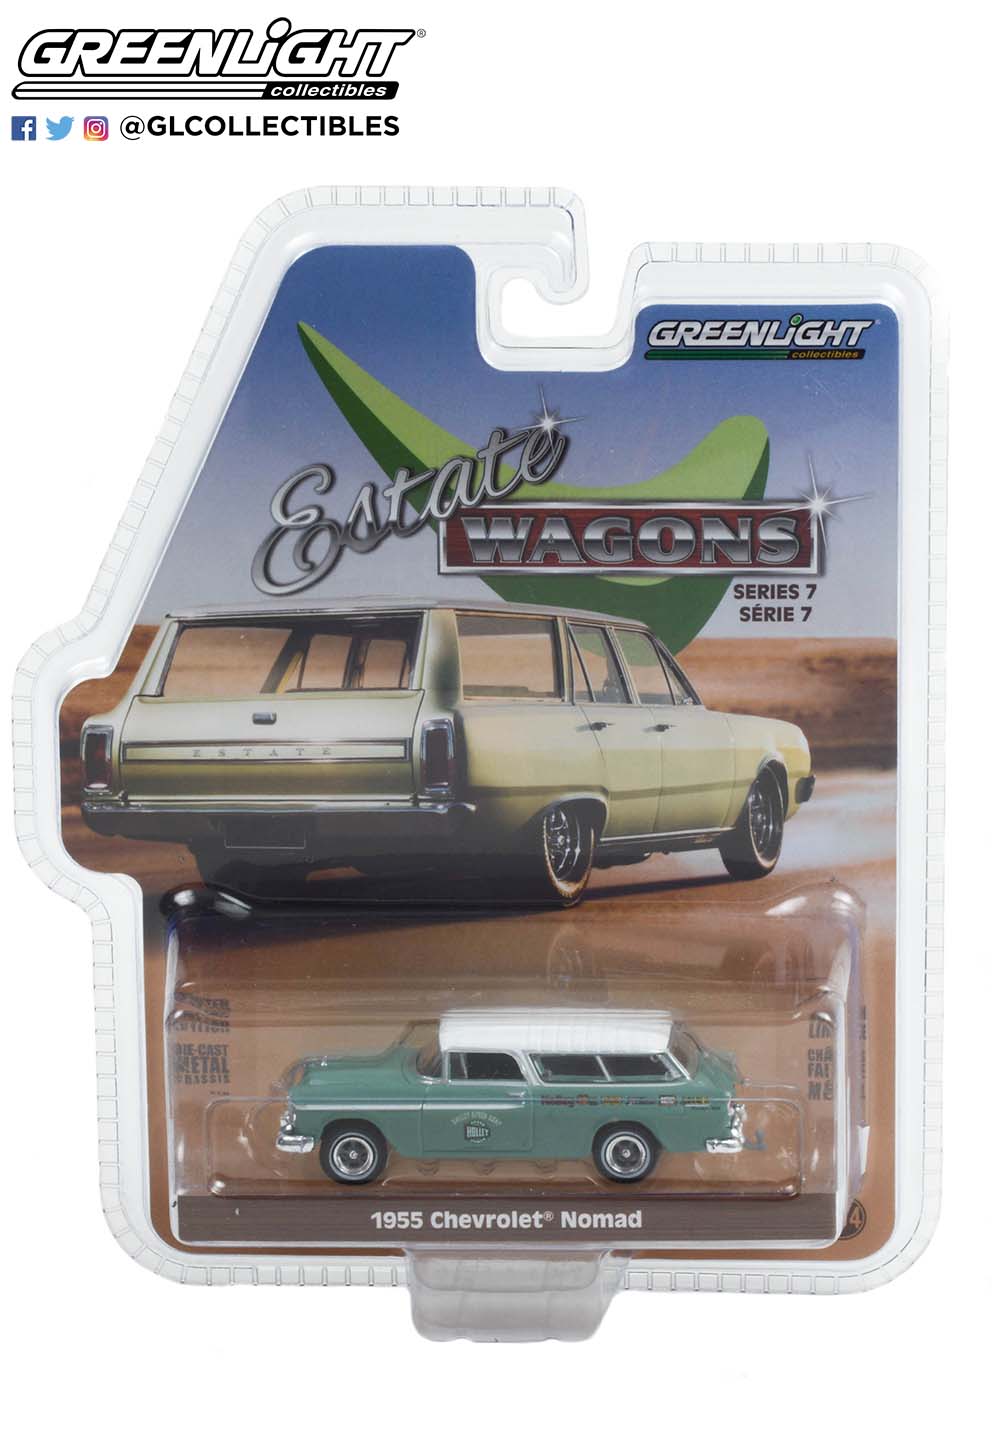 GreenLight 1:64 Estate Wagons Series 7 - 1955 Chevrolet Nomad - Holley Speed Shop 36040-A